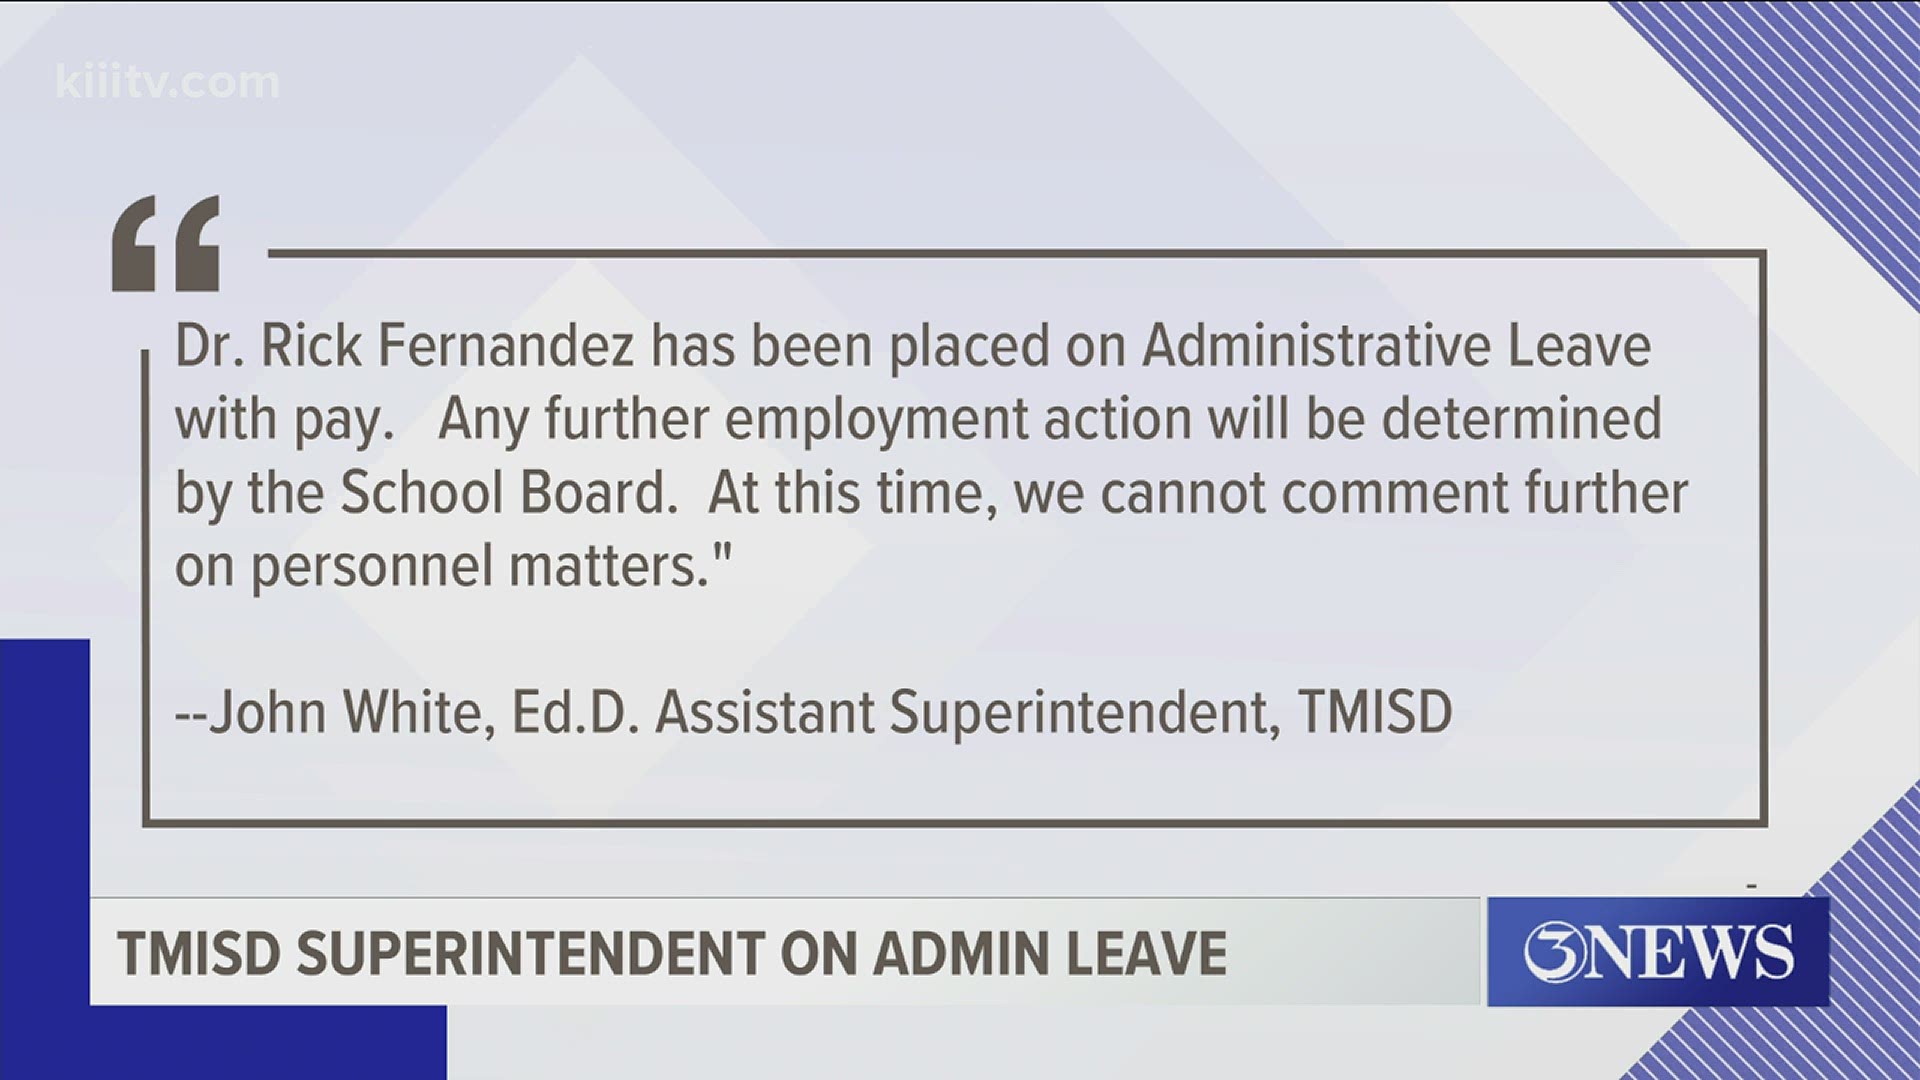 District leaders said any further employment action will be determined by the school board.